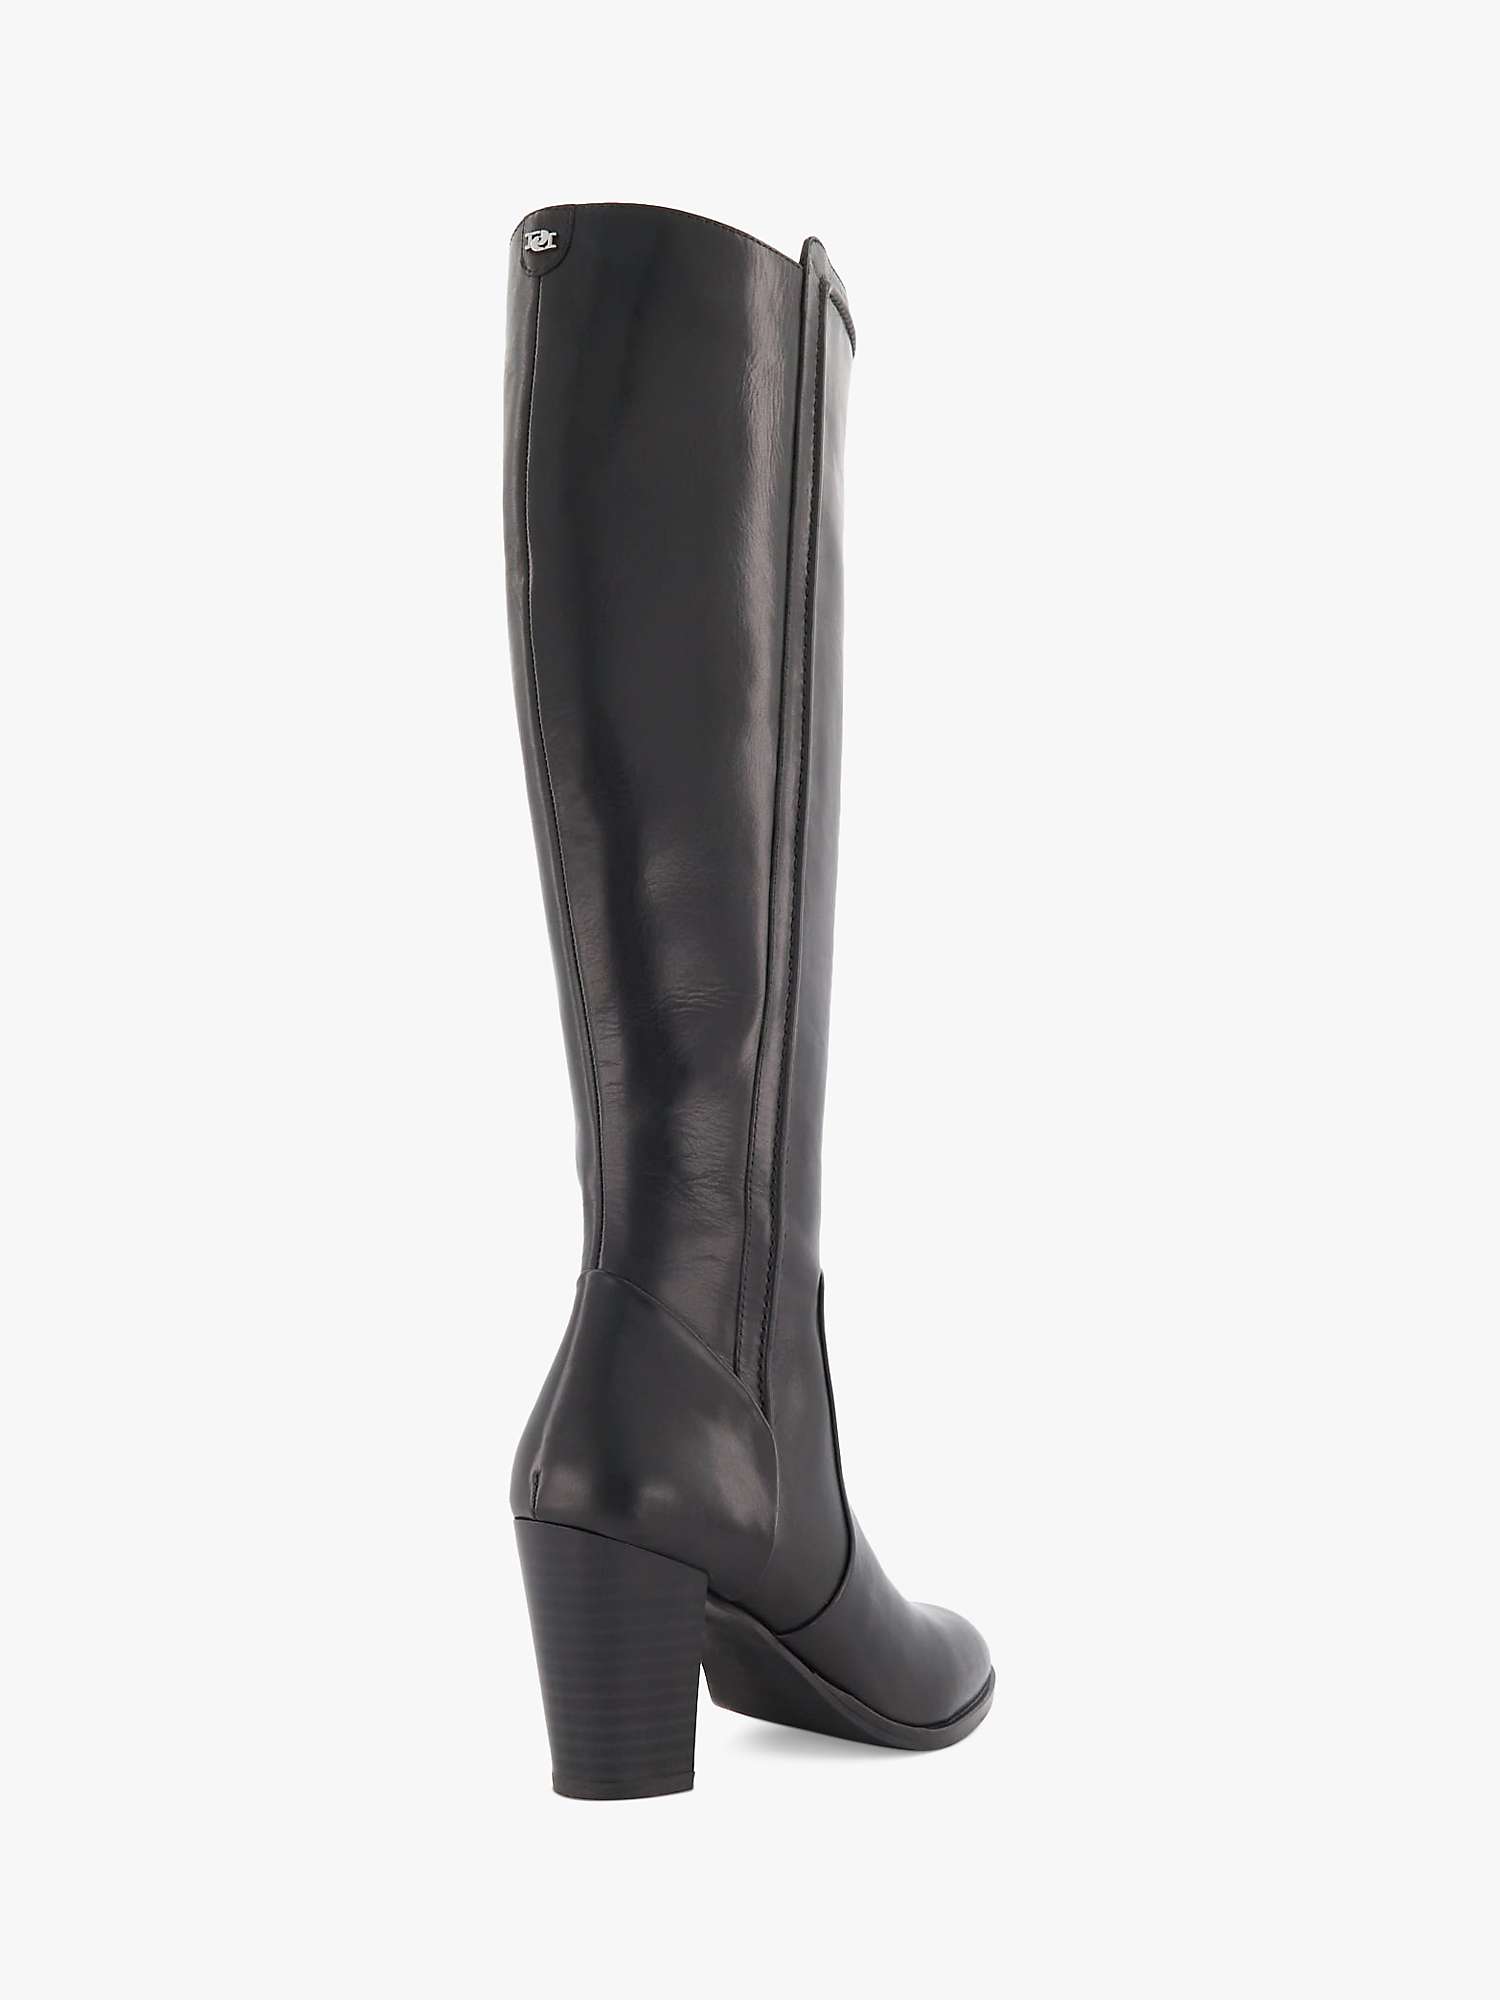 Dune Tippy 2 Leather Knee High Boots, Black at John Lewis & Partners